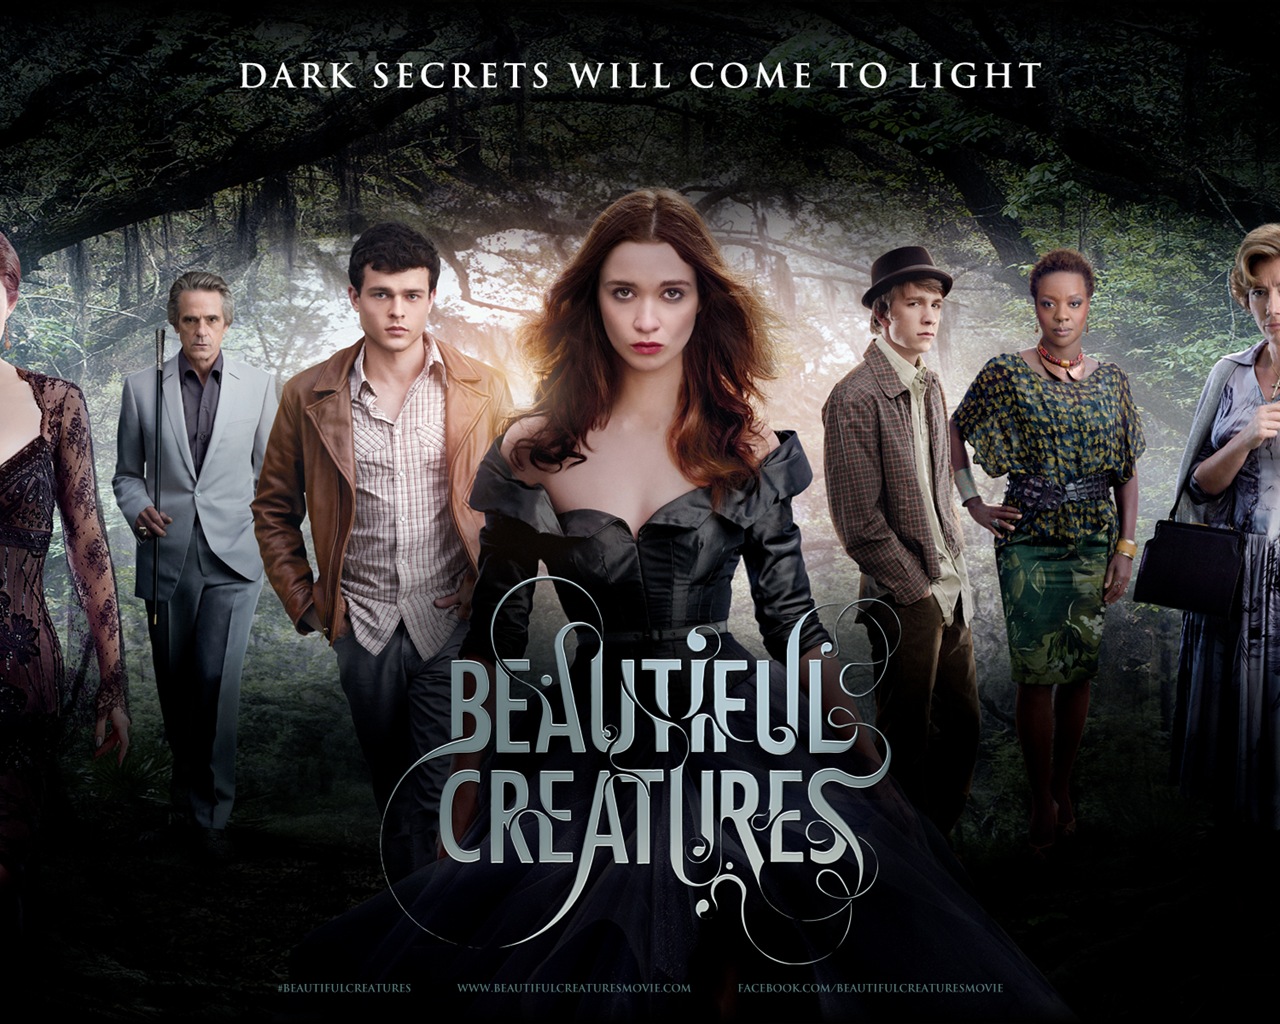 Beautiful Creatures 2013 HD movie wallpapers #1 - 1280x1024